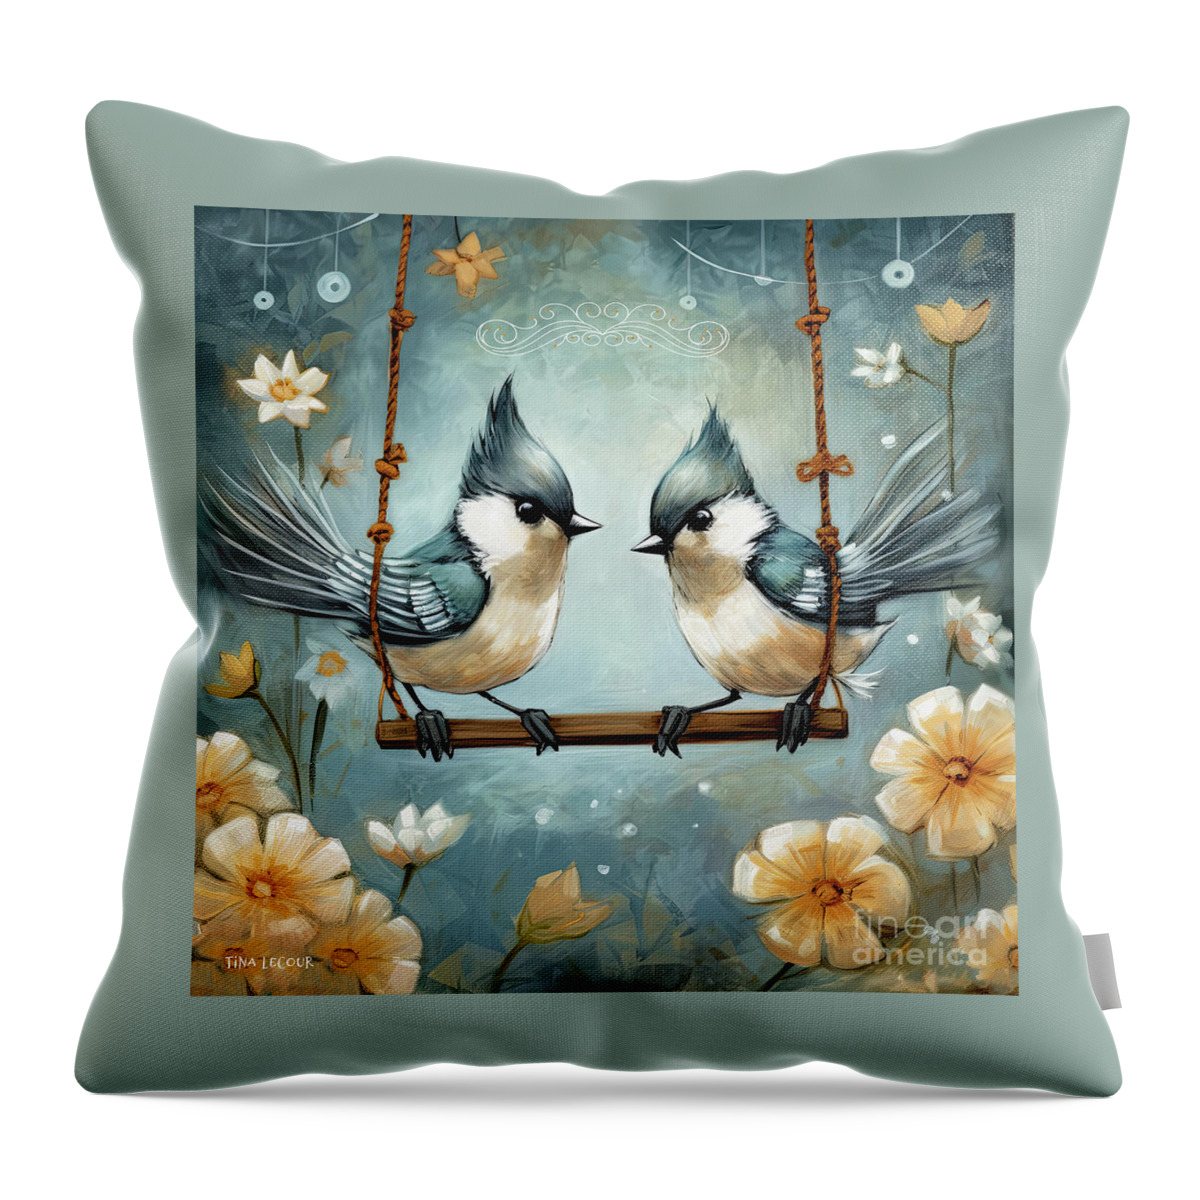 Titmouse Birds Throw Pillow featuring the painting Romance On The Swing by Tina LeCour